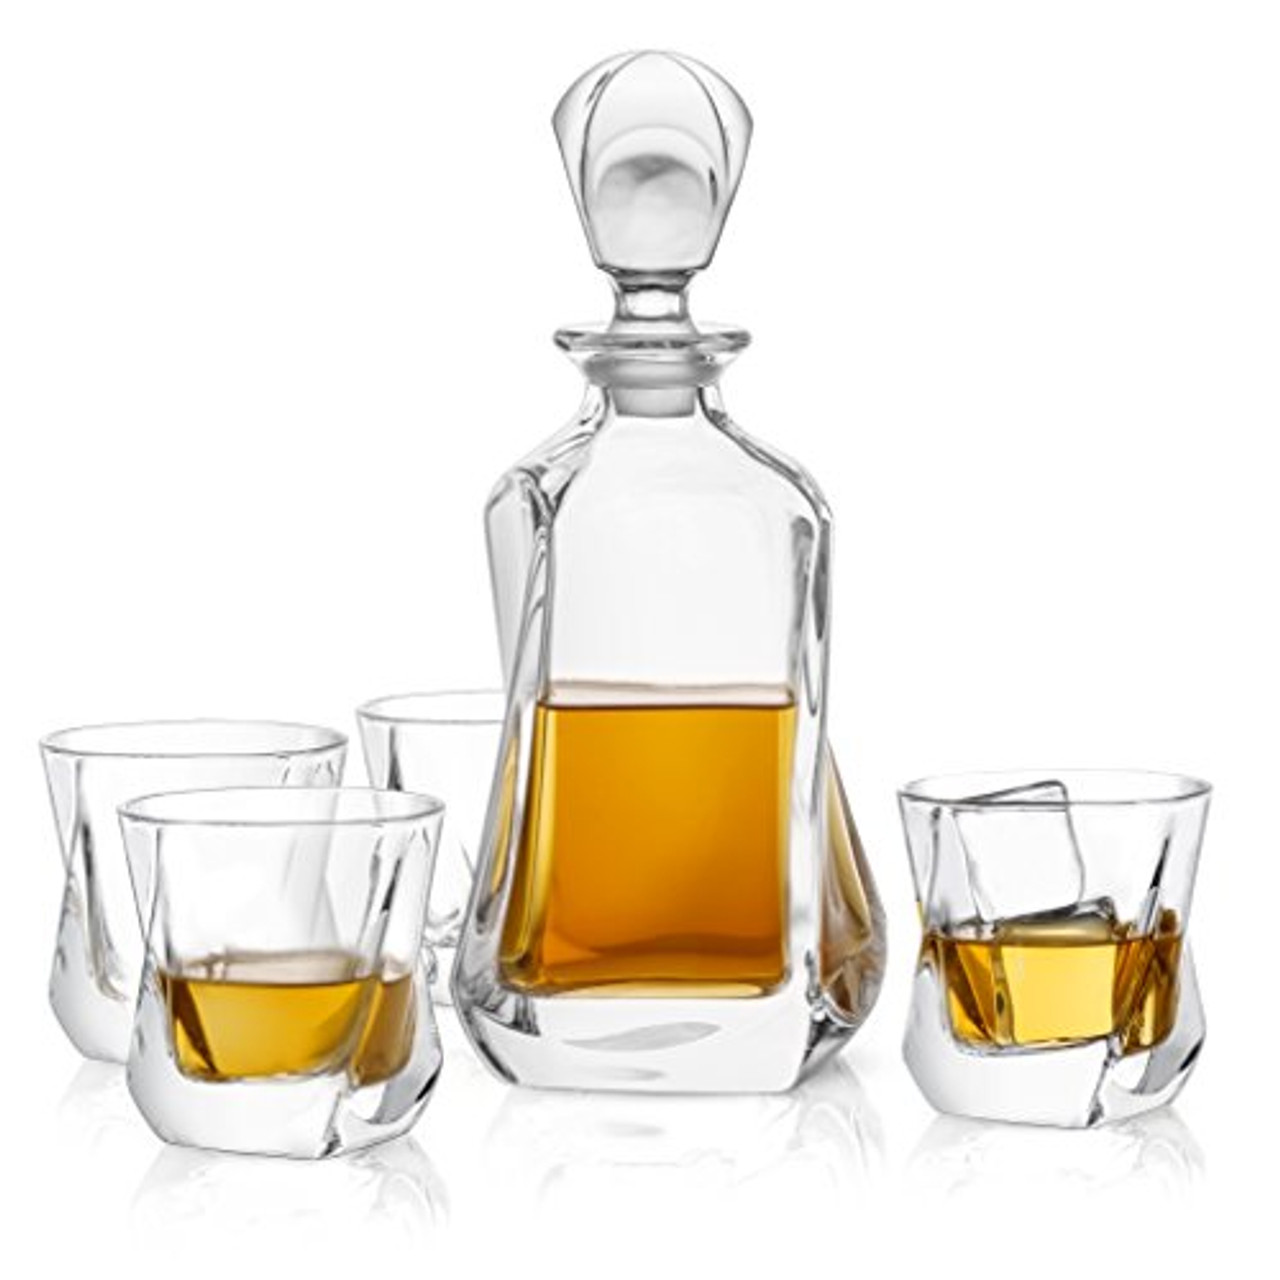 Crystal Whiskey Decanter Set, Hand Made Liquor Decanter With 4 Glasses In  Luxury Box. Best for Scotch Bourbon Whisky Rum Alcohol Brandy, Unique